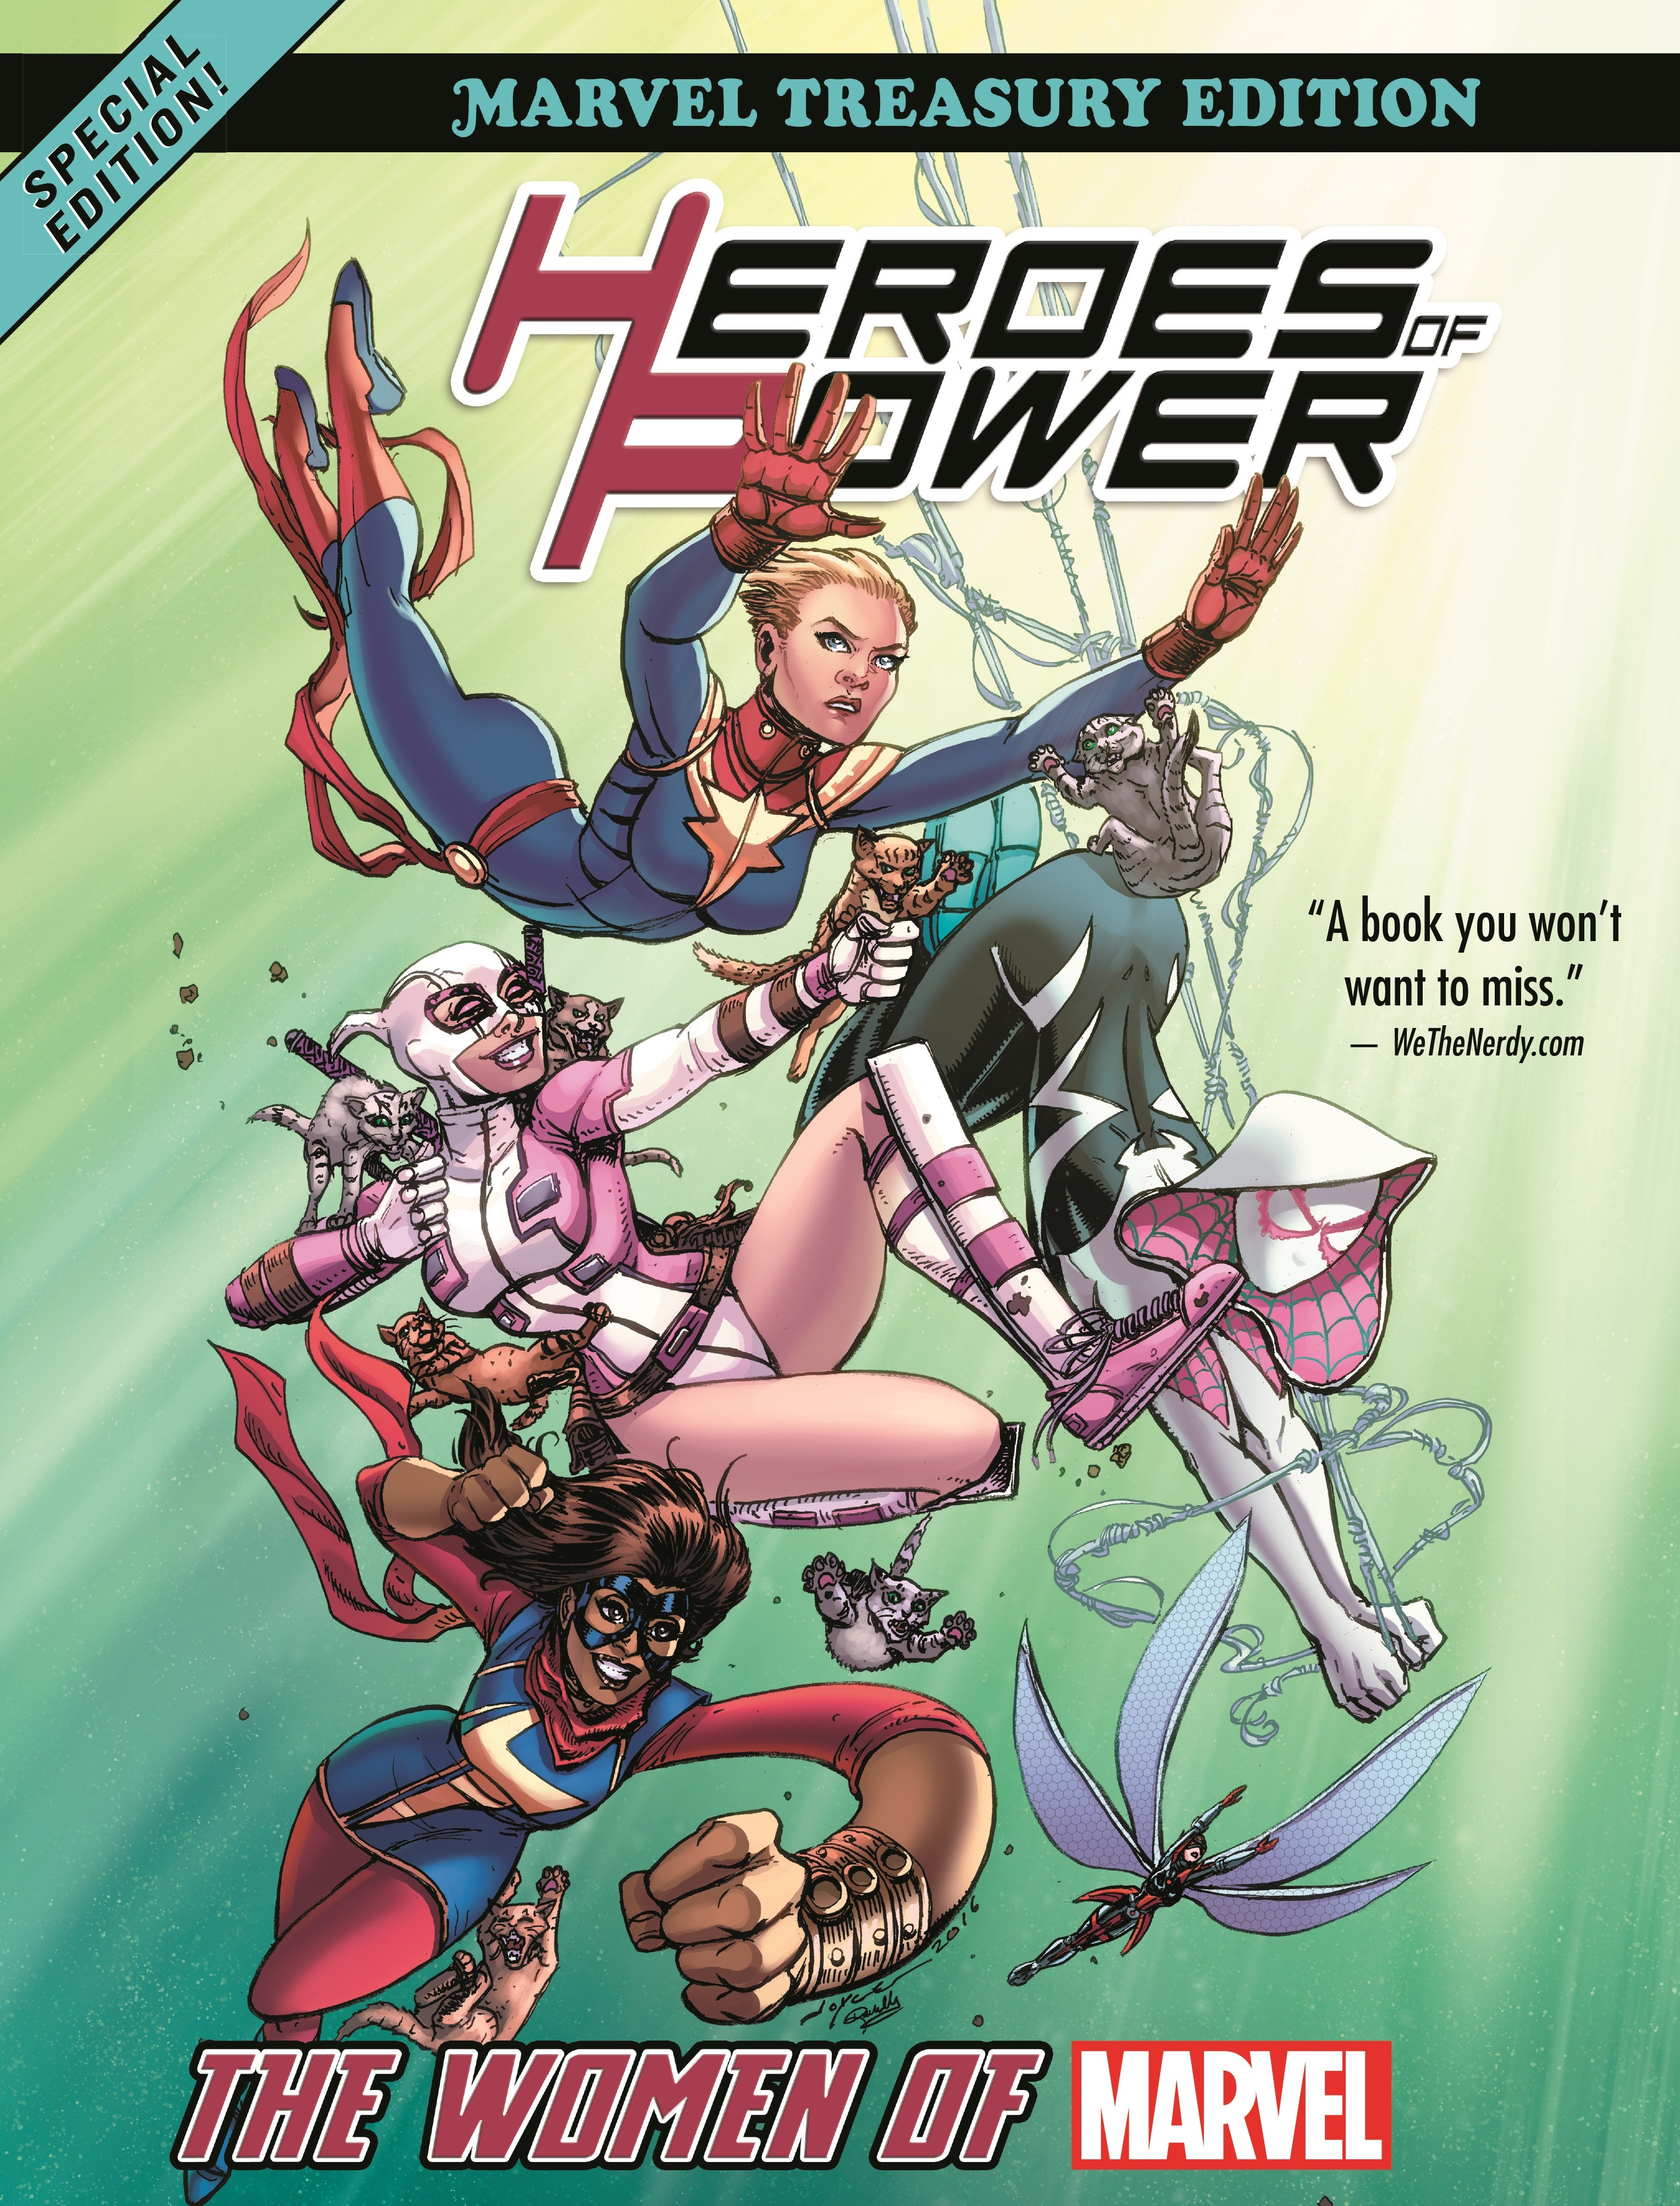 Heroes of Power: The Women of Marvel - All-New Marvel Treasury Edition (Trade Paperback)